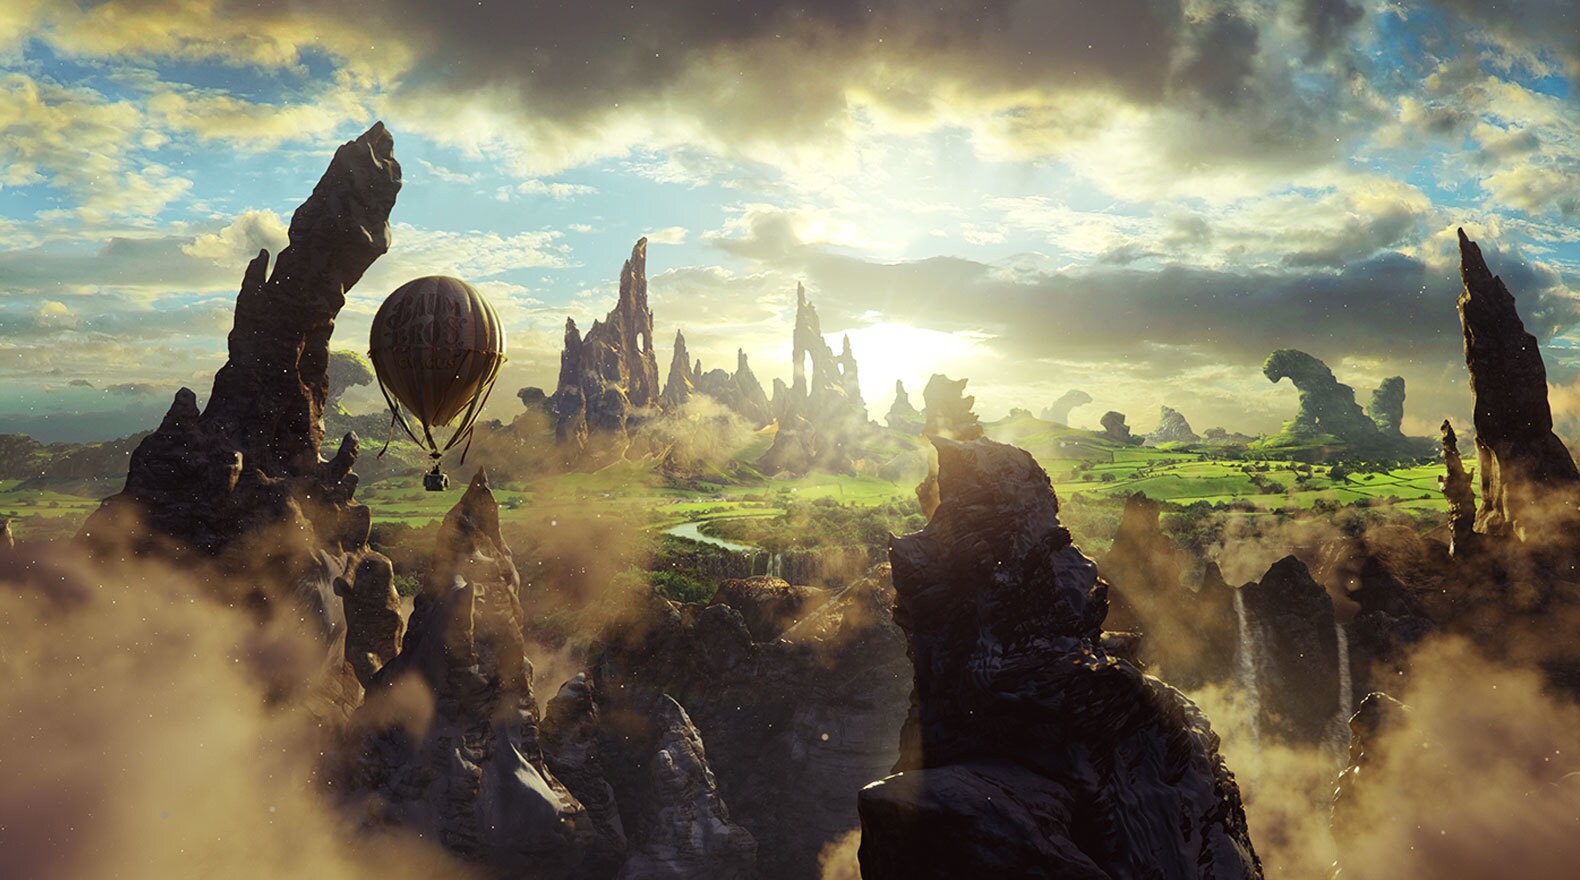 The Land of Oz in "Oz The Great and Powerful"